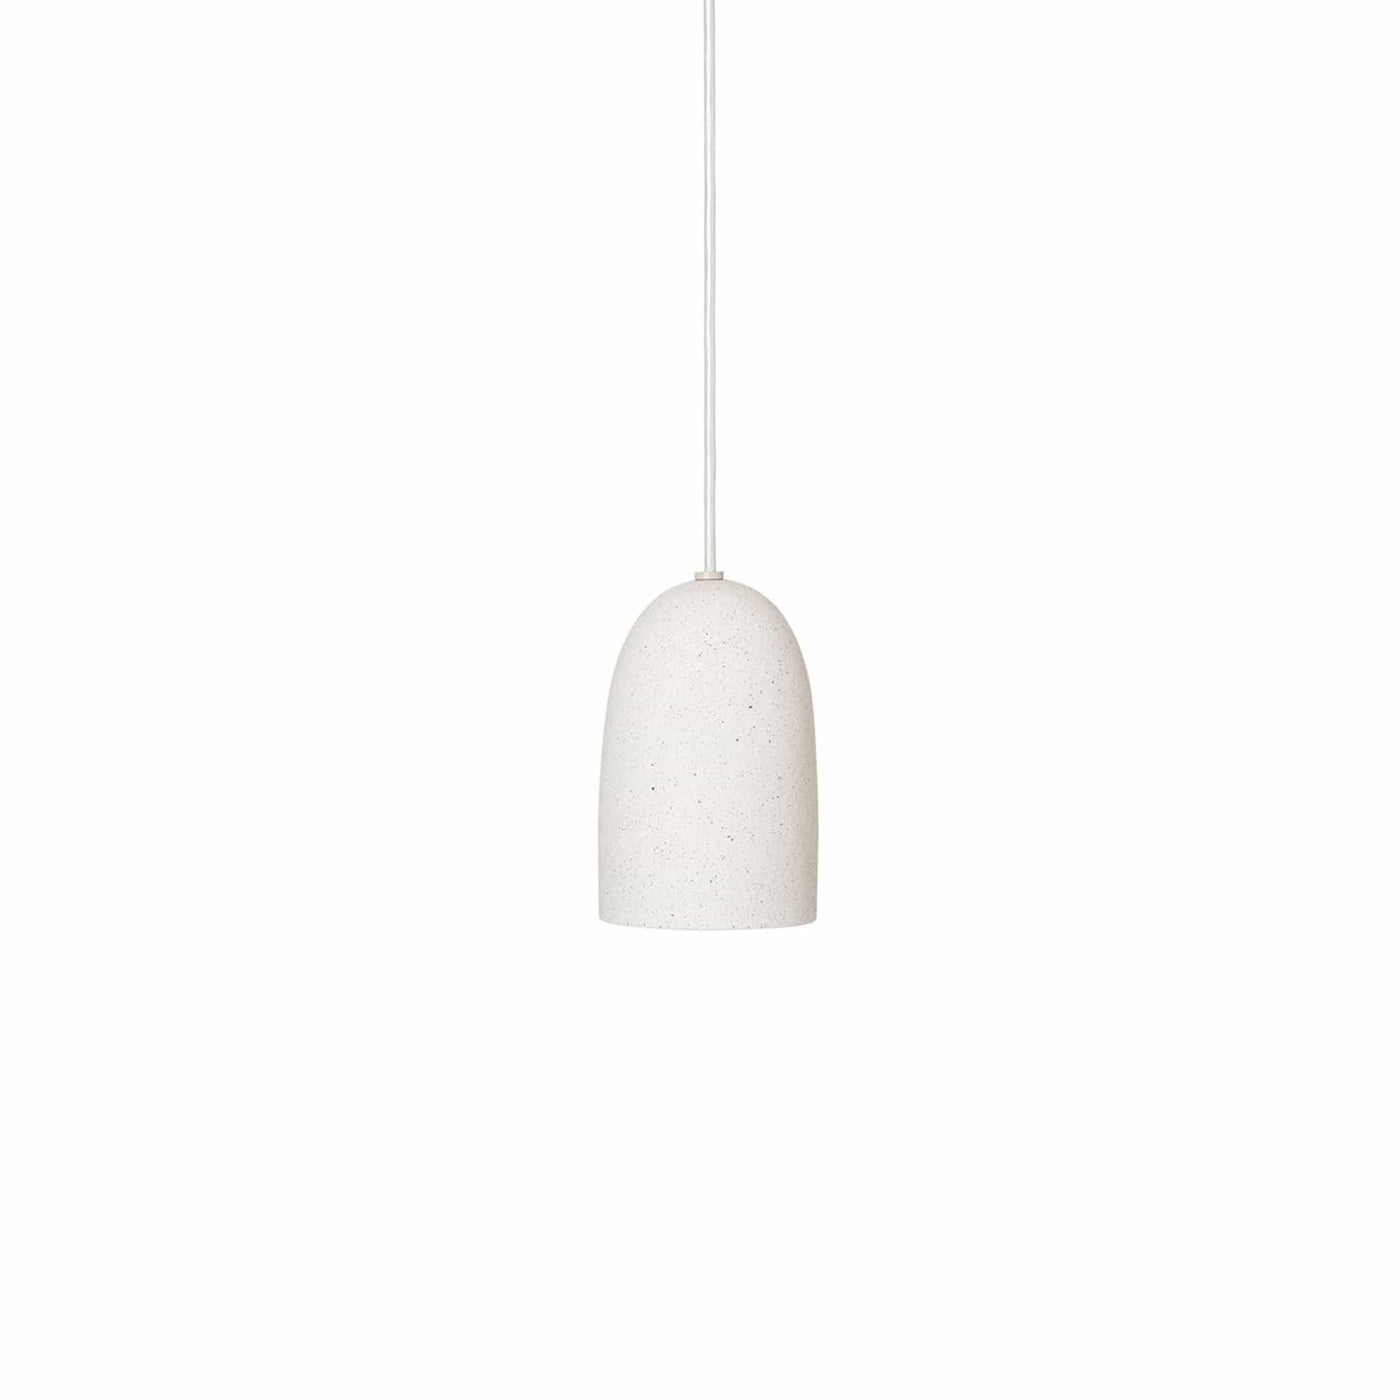 Ferm Living Speckle Pendant Small, shop online at someday designs